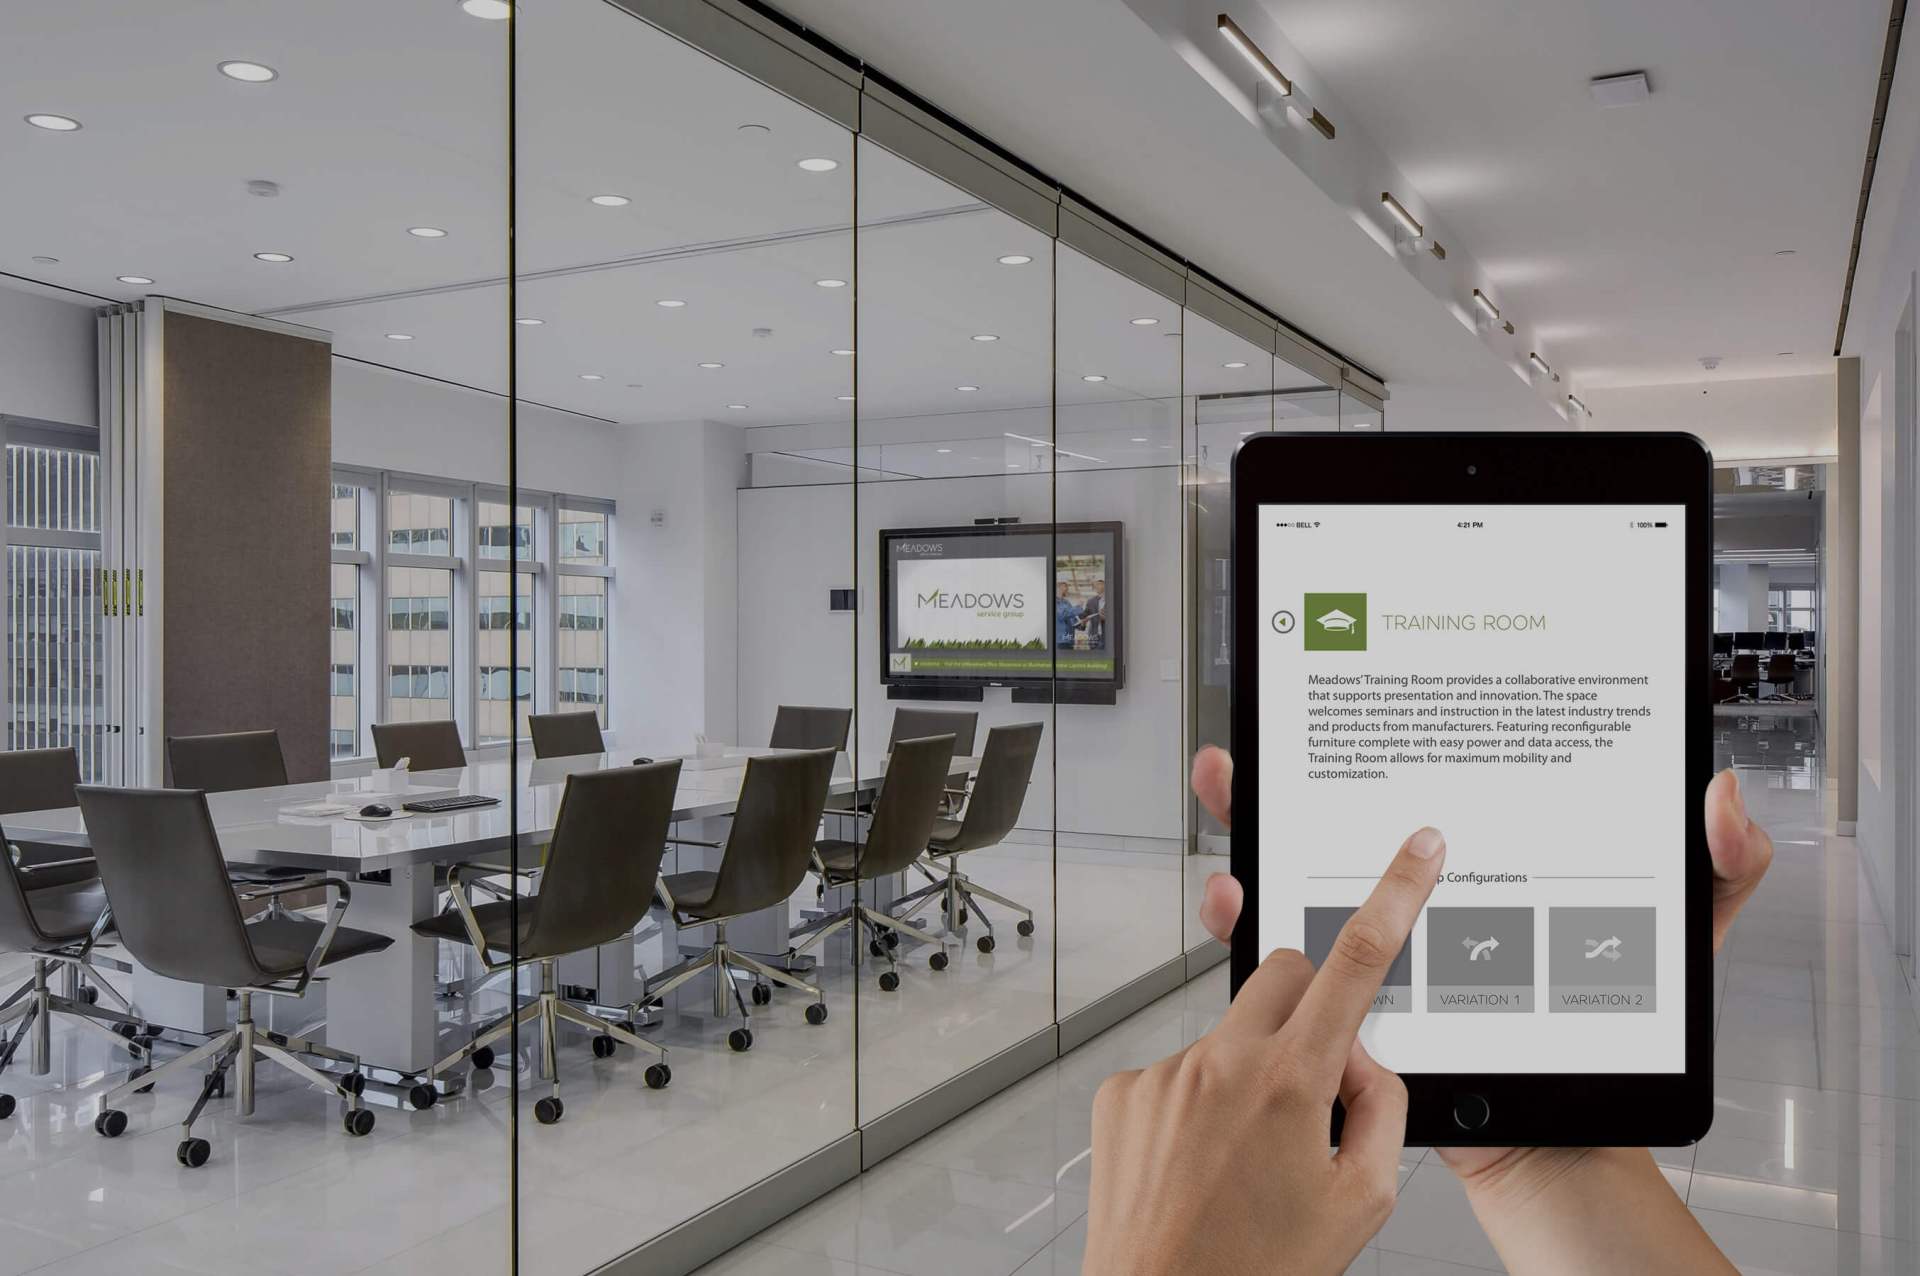 Case Study: Office design sales and installation goes digital